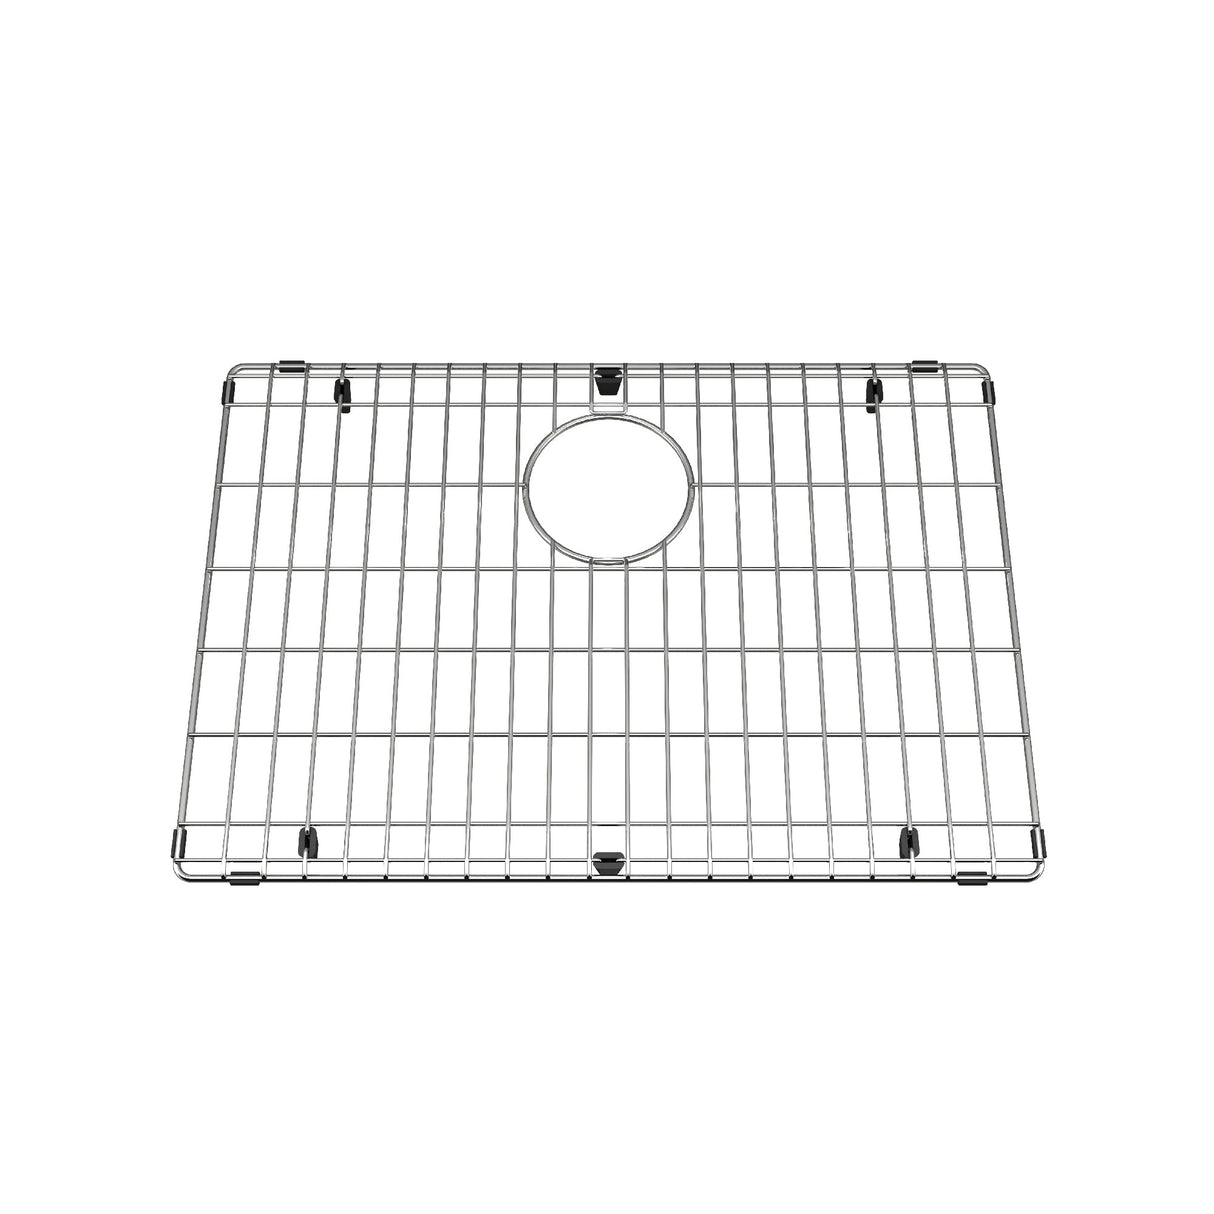 KINDRED BG523S Stainless Steel Bottom Grid for Sink 15-in x 21.5-in In Stainless Steel